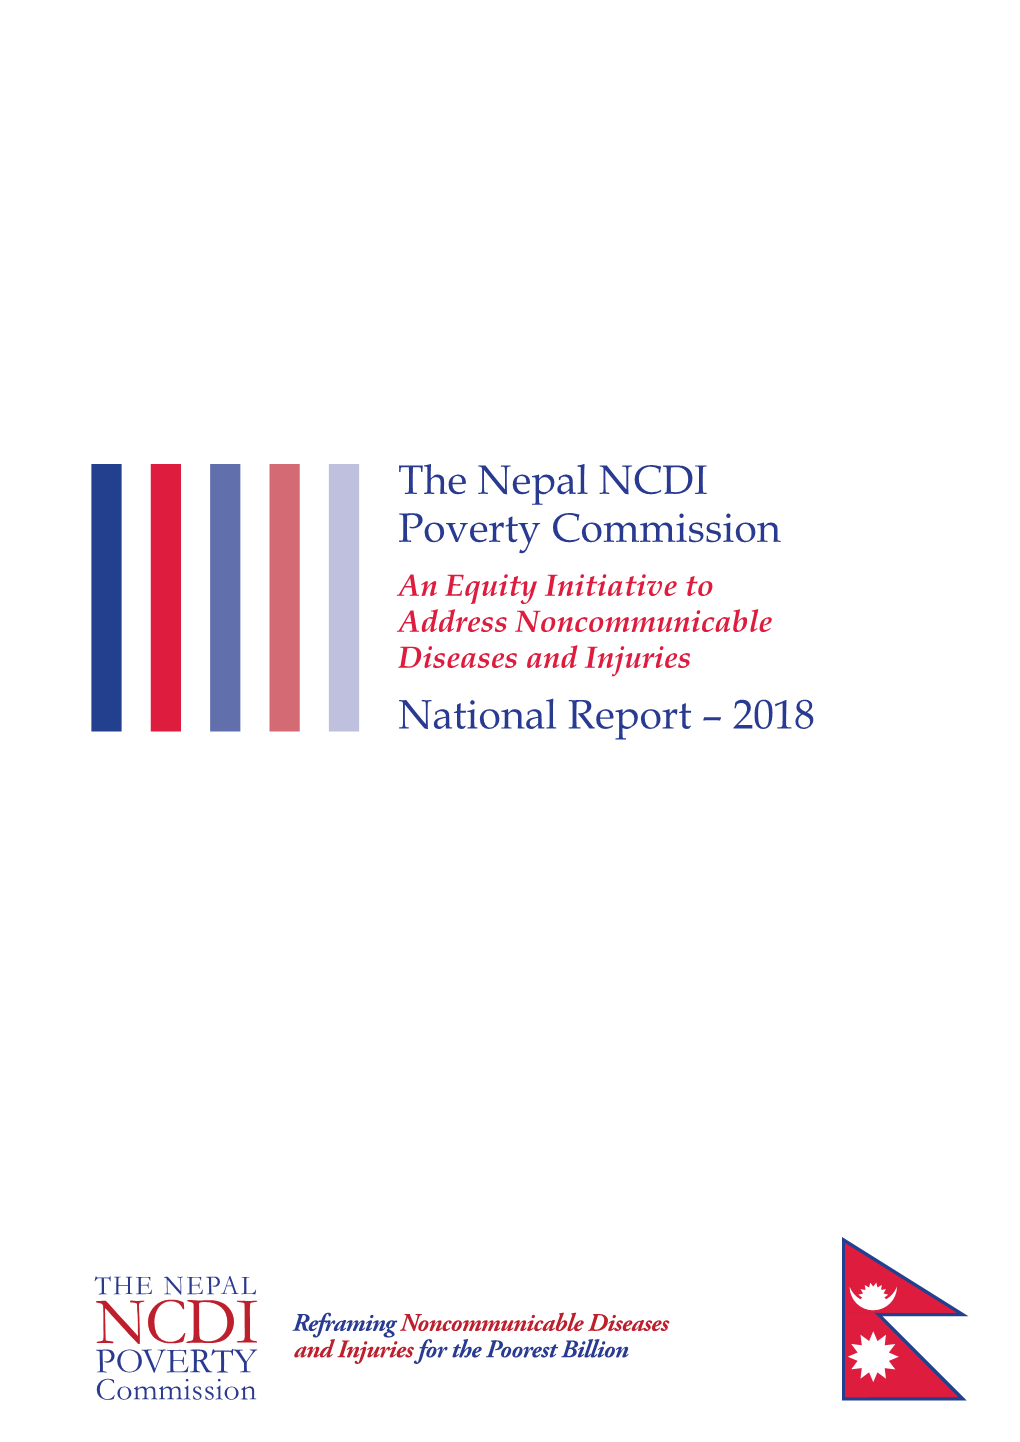 Nepal NCDI Poverty Commission 2018 Report